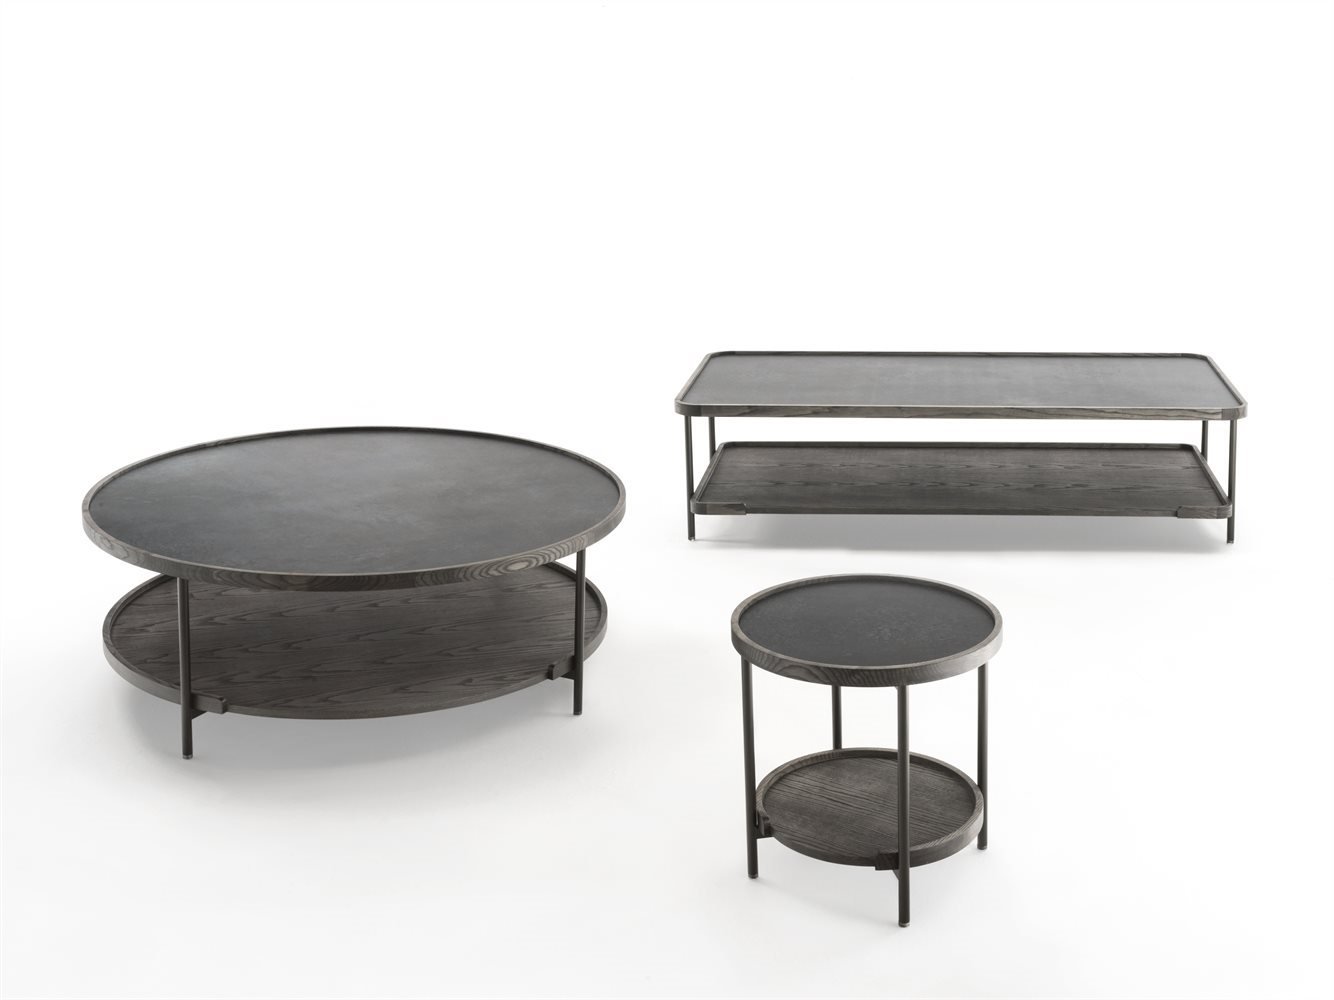 Koster 150x80 Coffee Table from Porada, designed by S. Tollgard